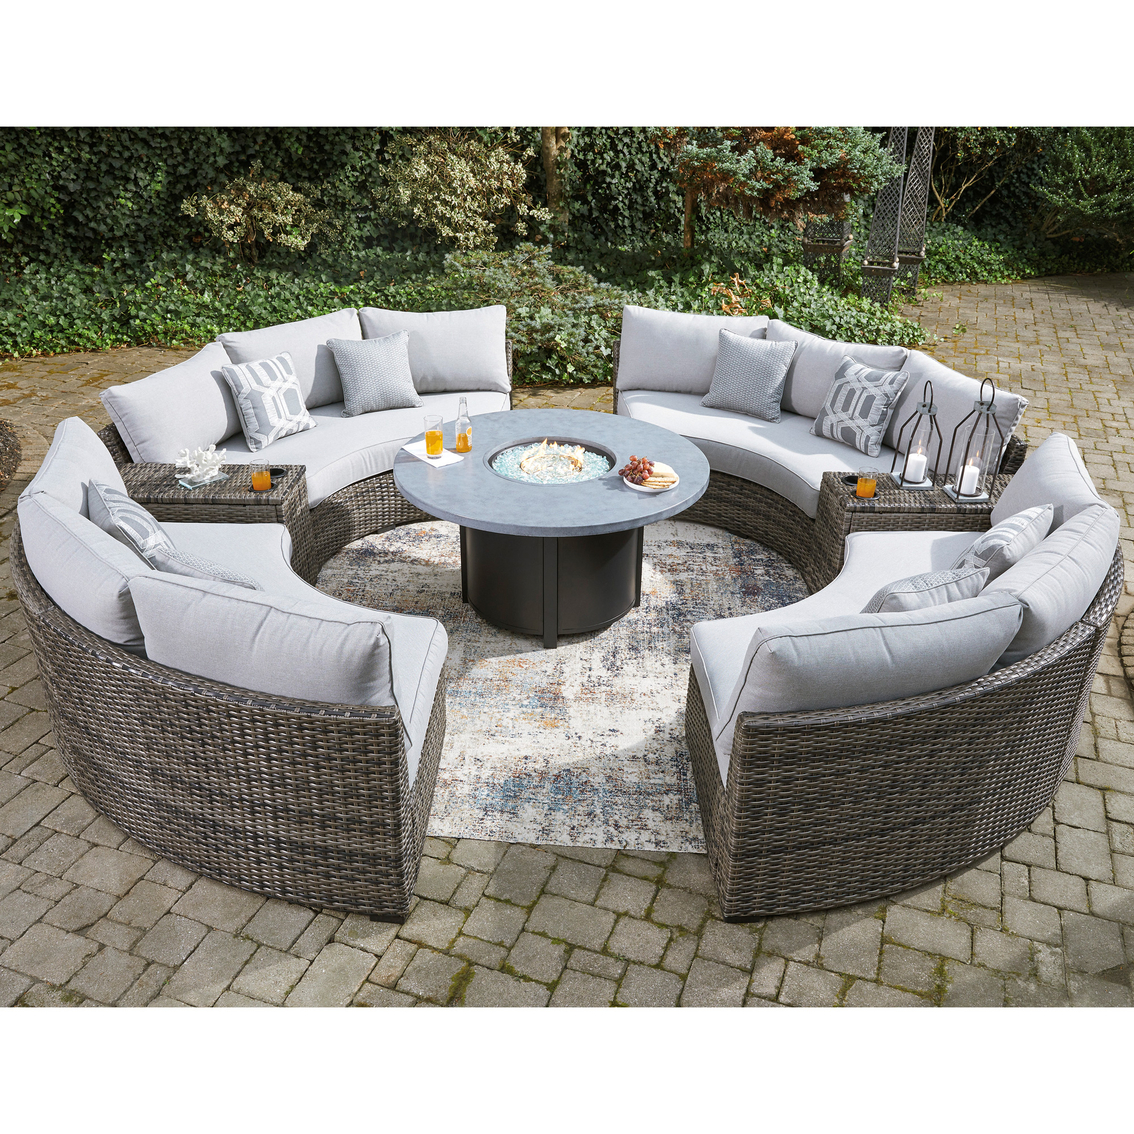 Signature Design by Ashley Harbor Court 7 pc. Outdoor Set with Firepit Table